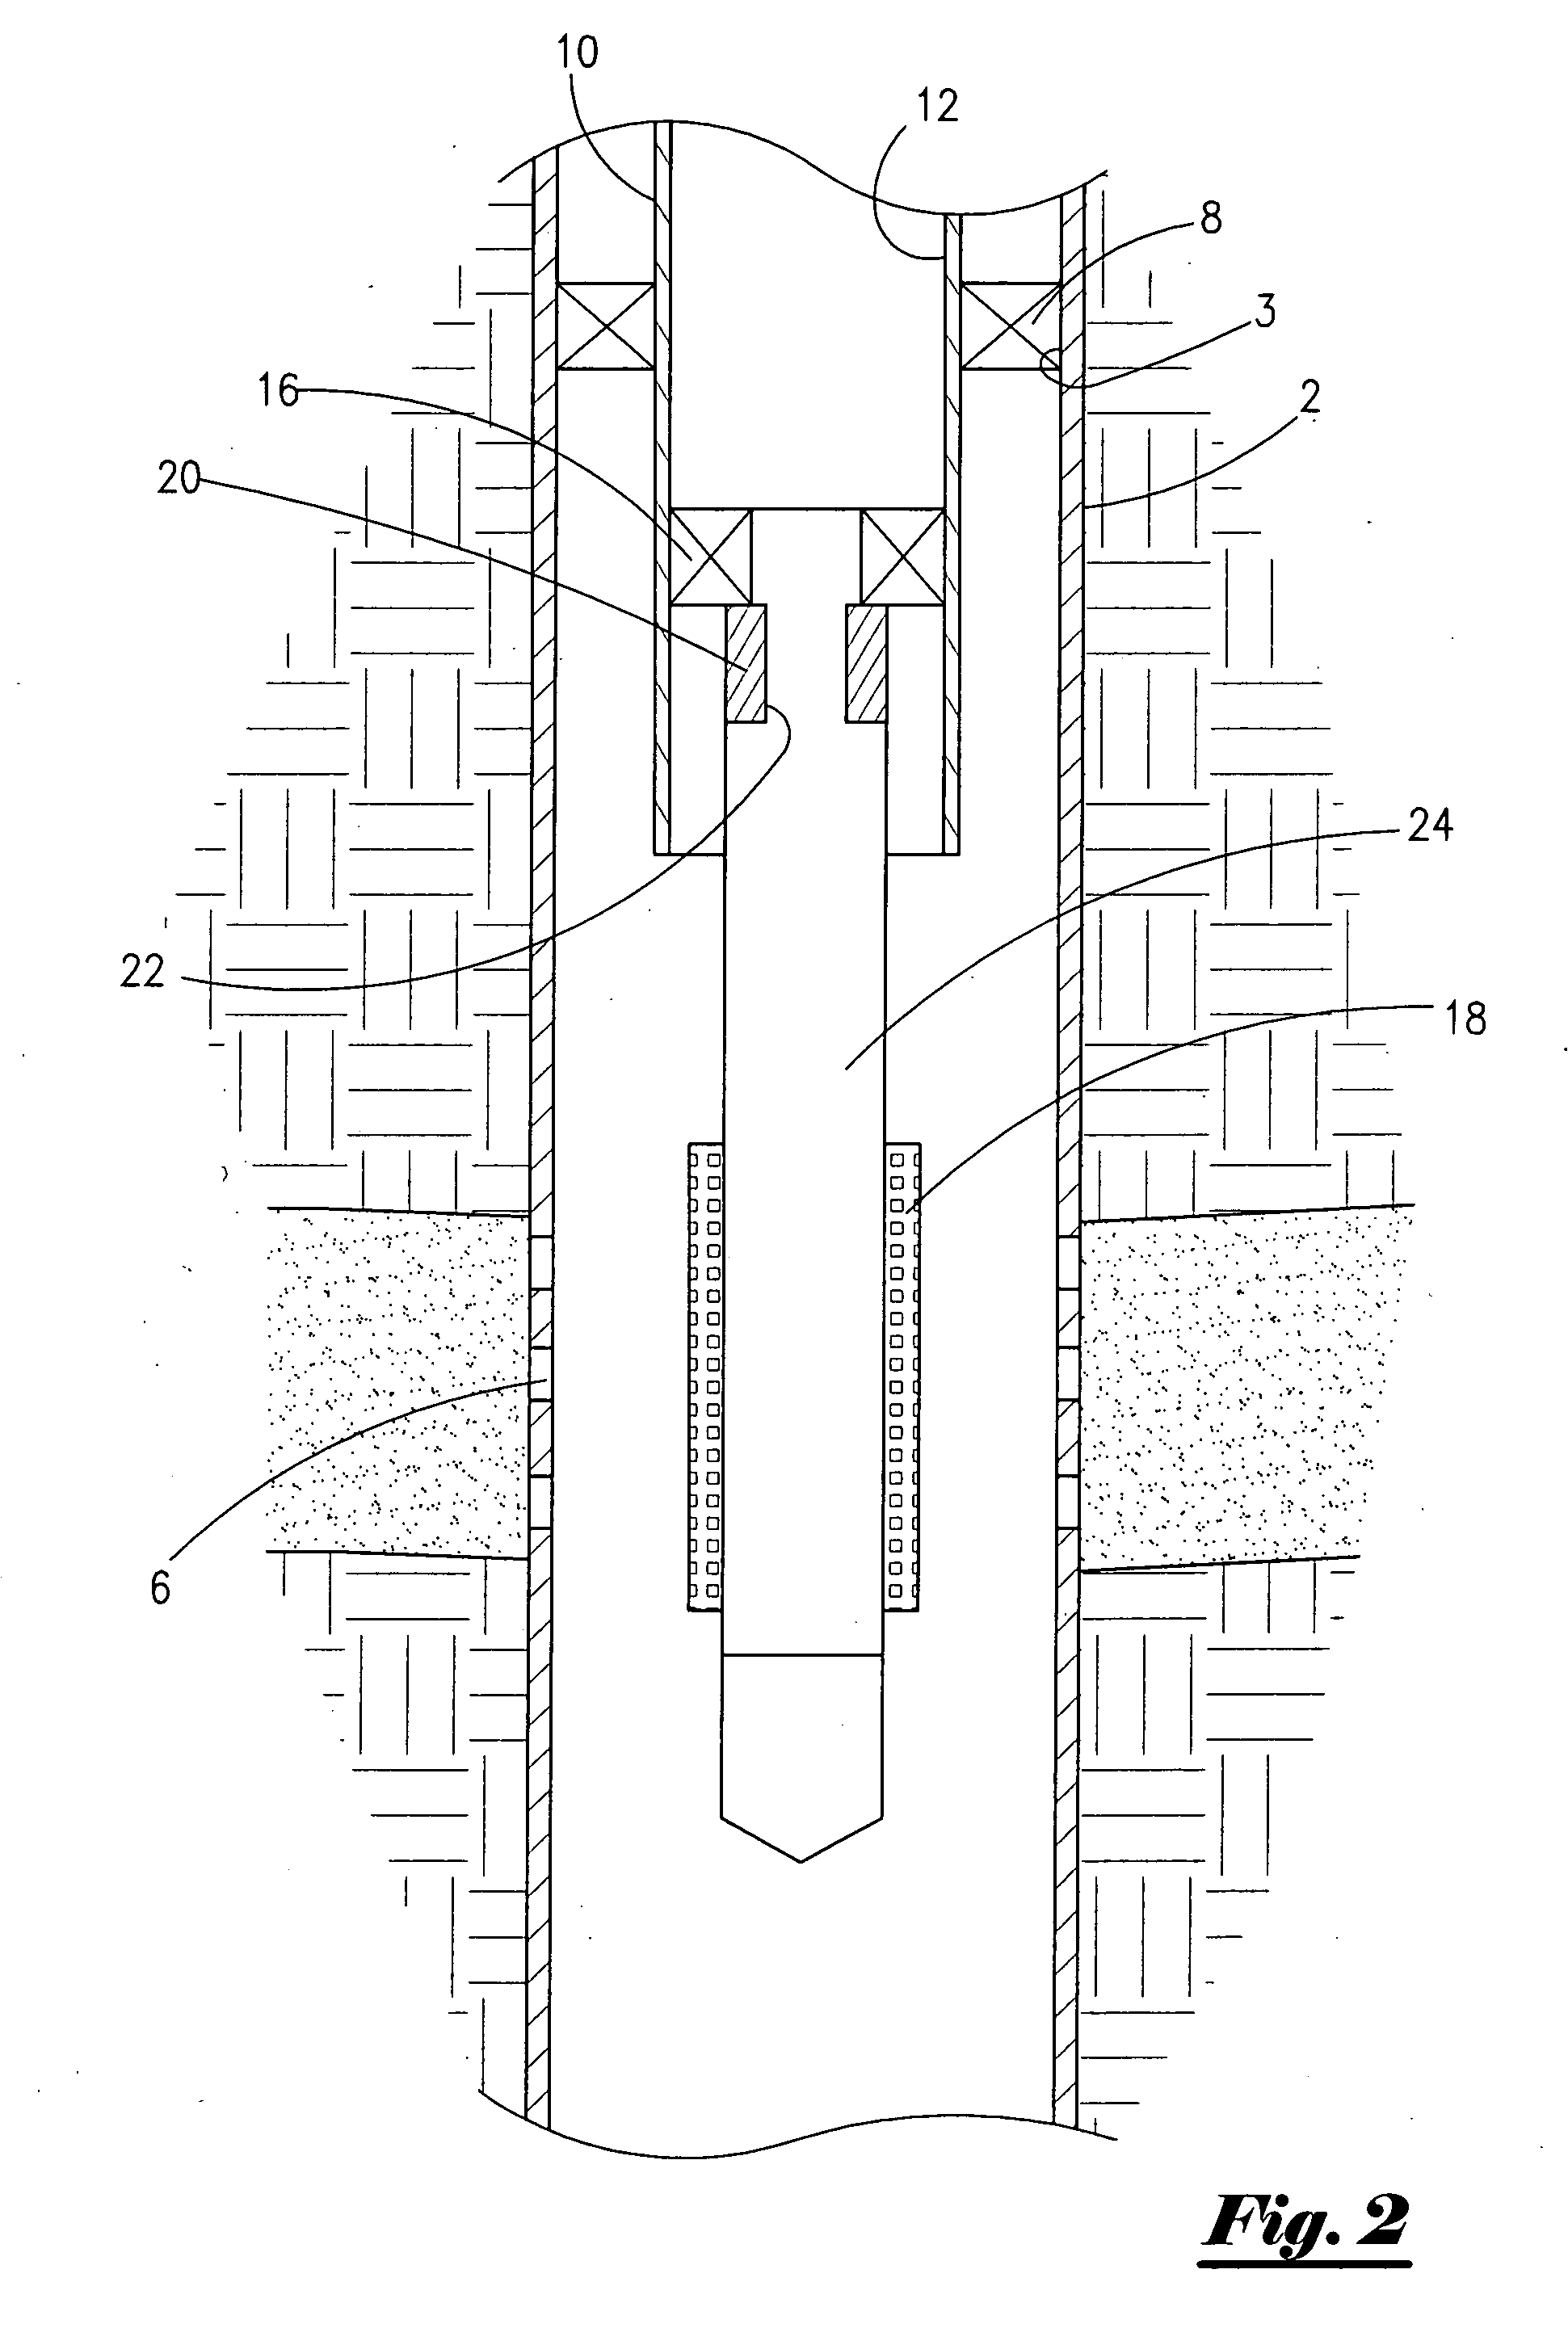 Apparatus and Method for Depositing a Slurry in a Well